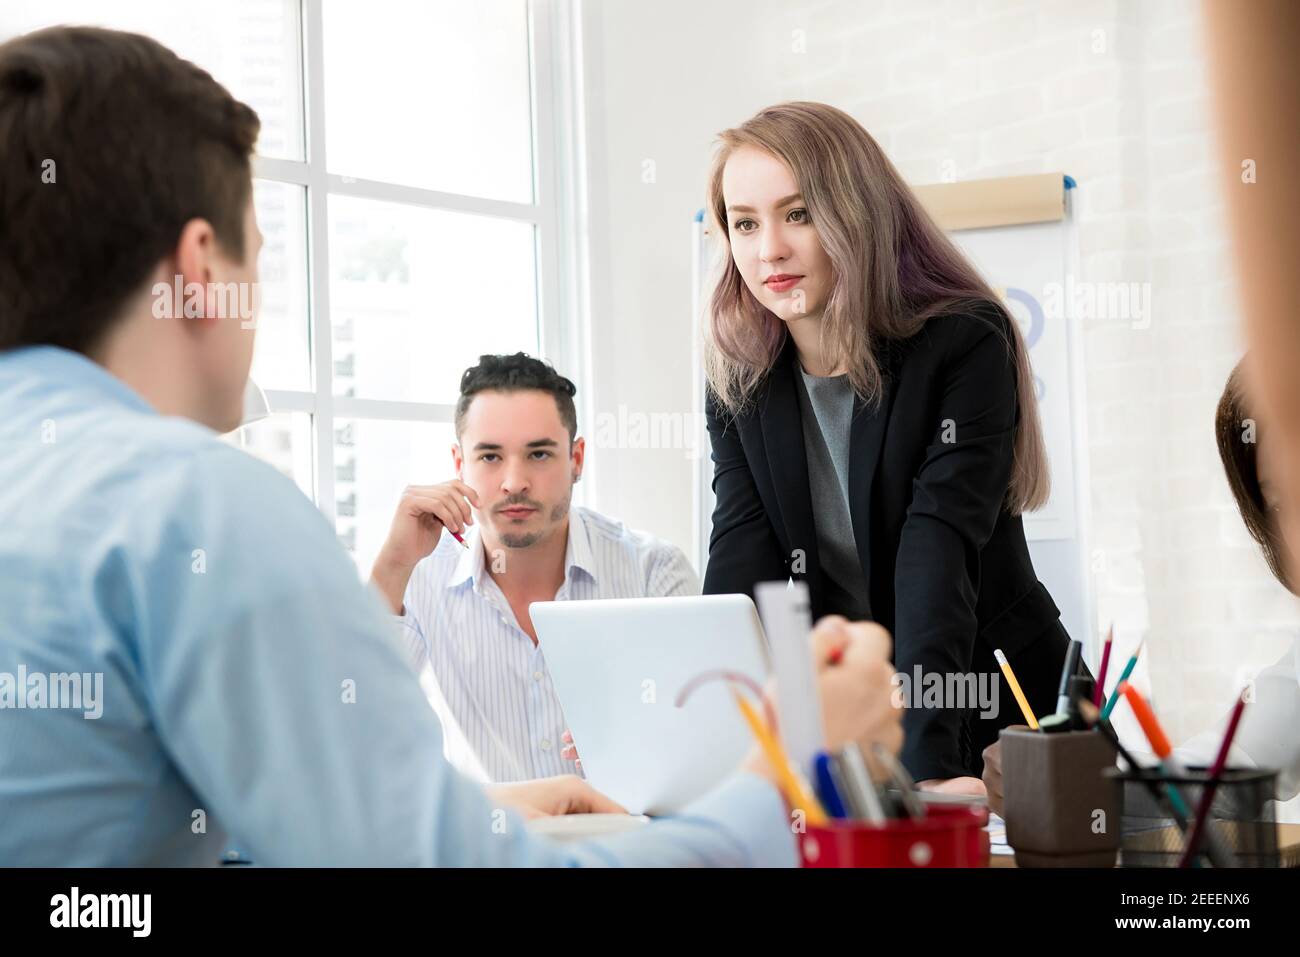 Female leader standing and paying attention to her colleague in the meeting Stock Photo